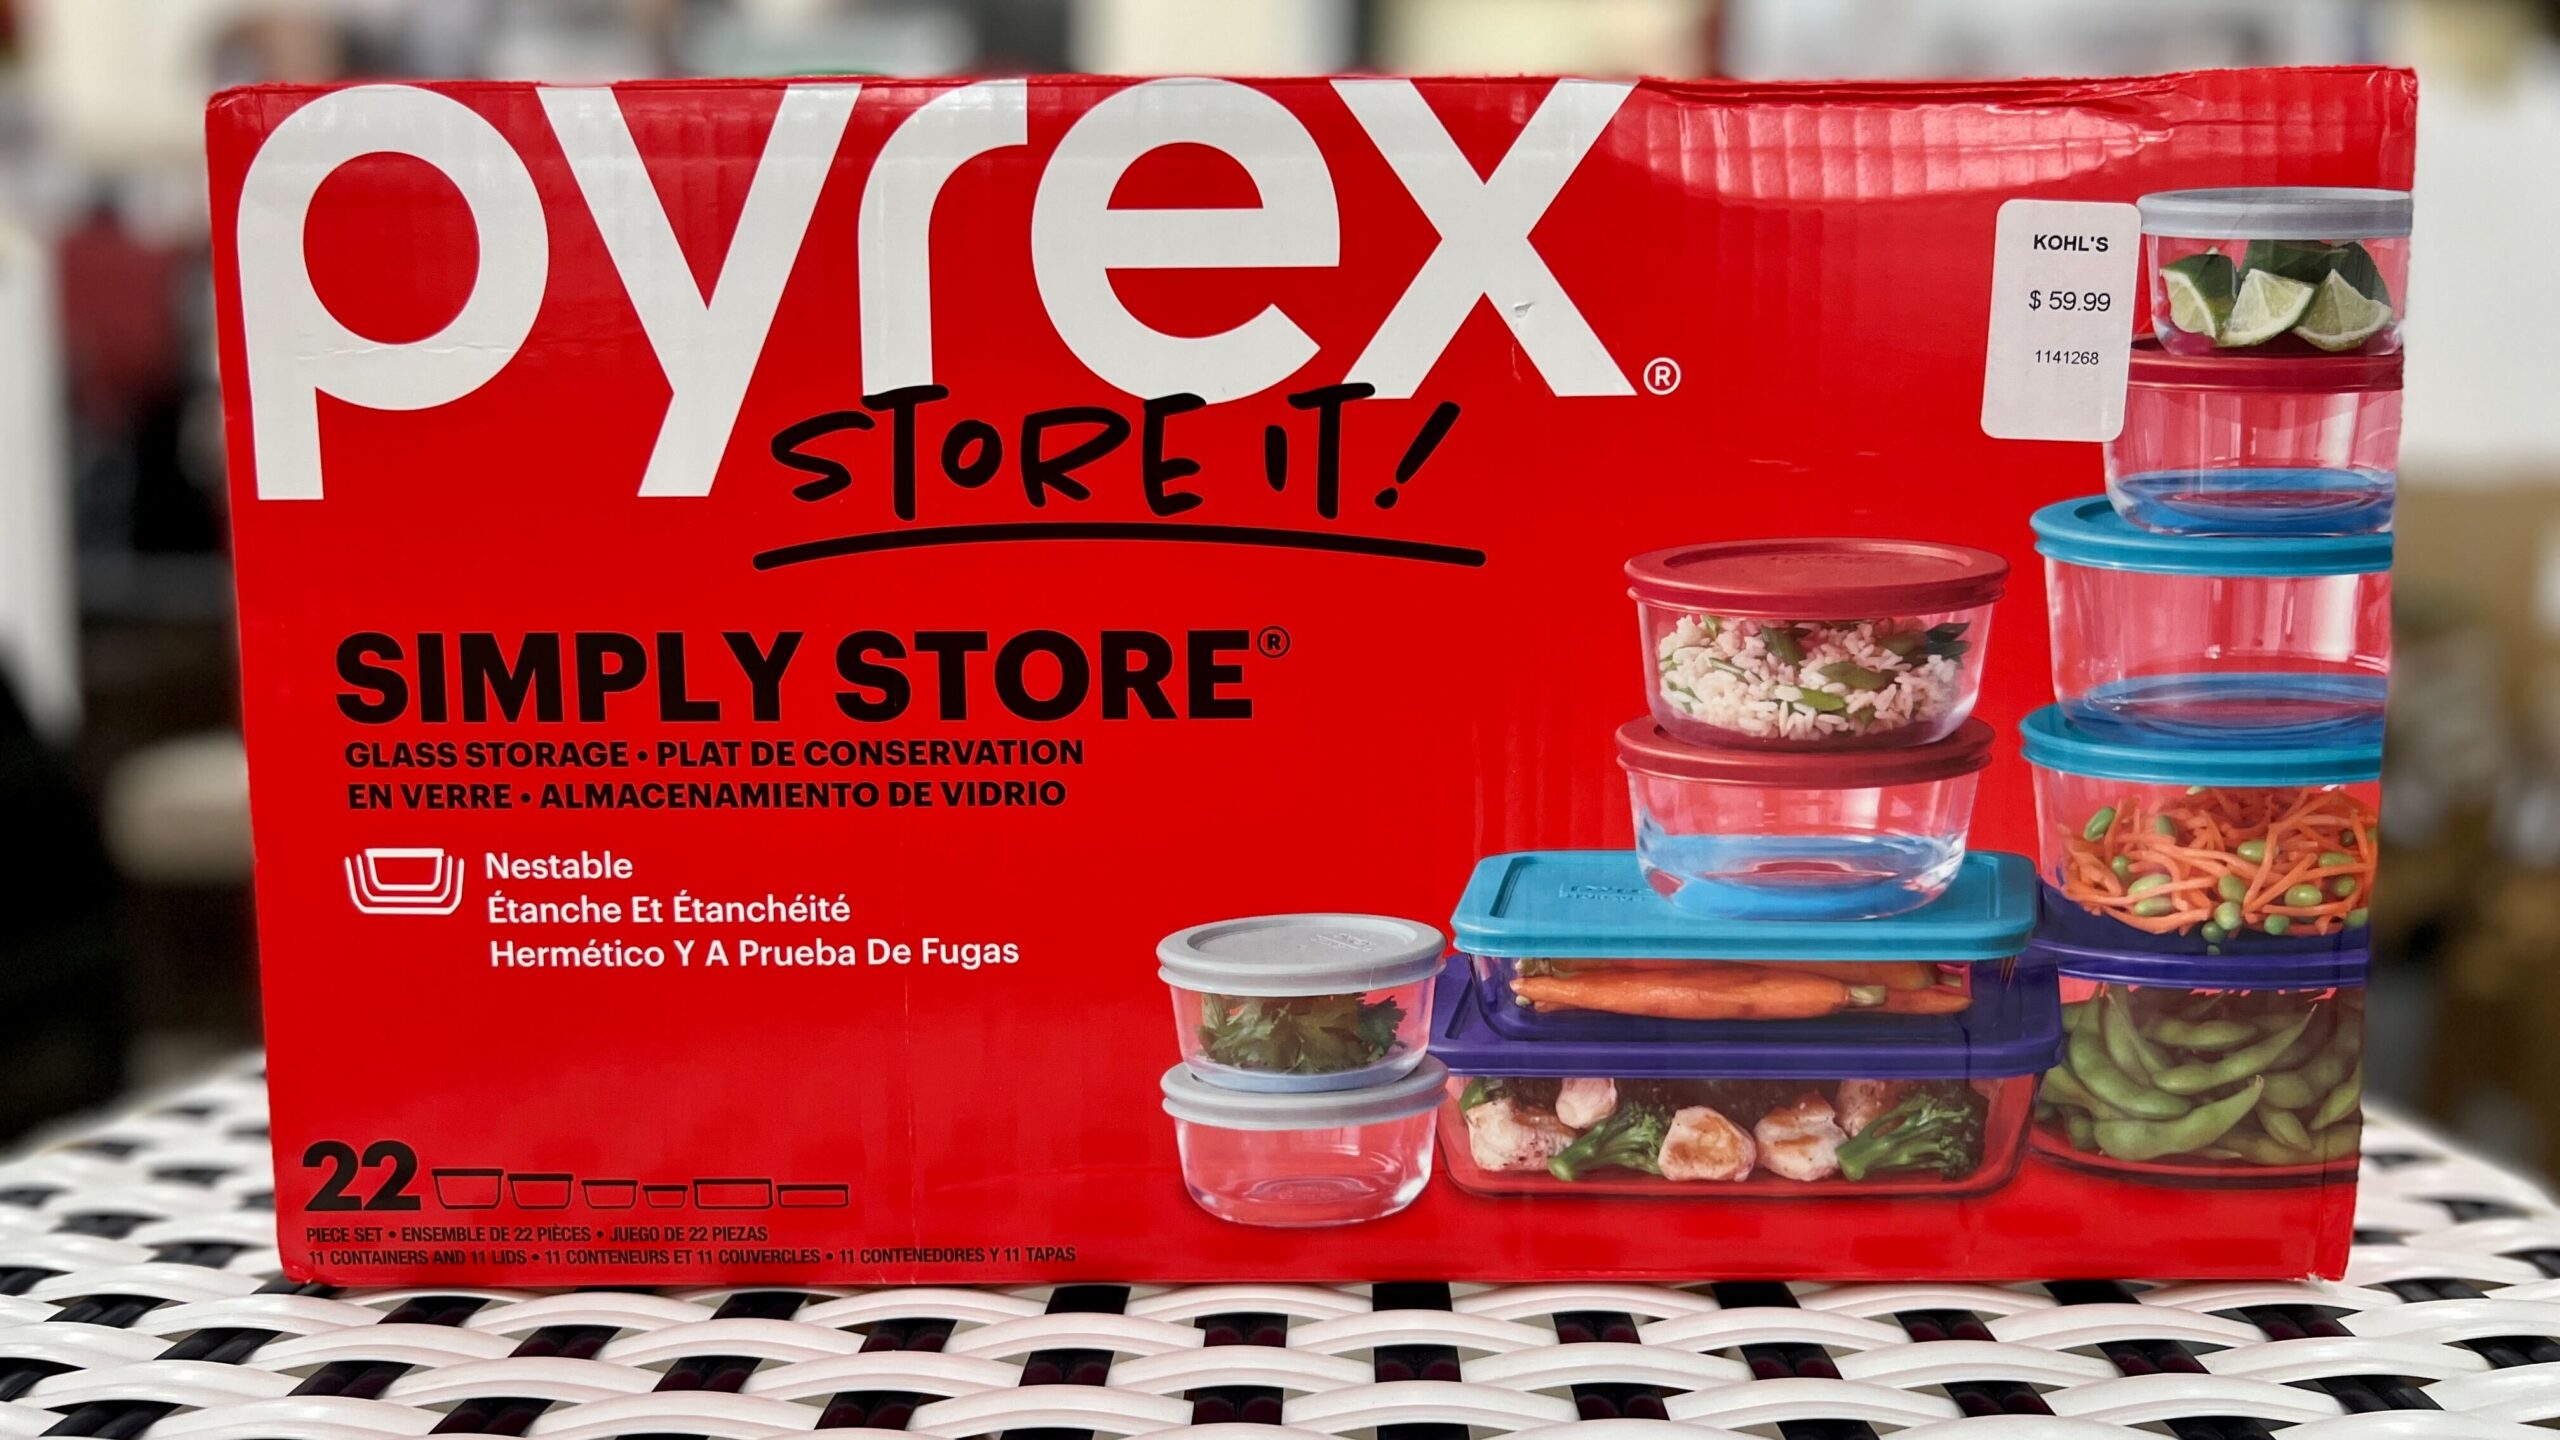 kohl-s-pyrex-22-pc-glass-food-storage-set-2-packs-for-39-98-the